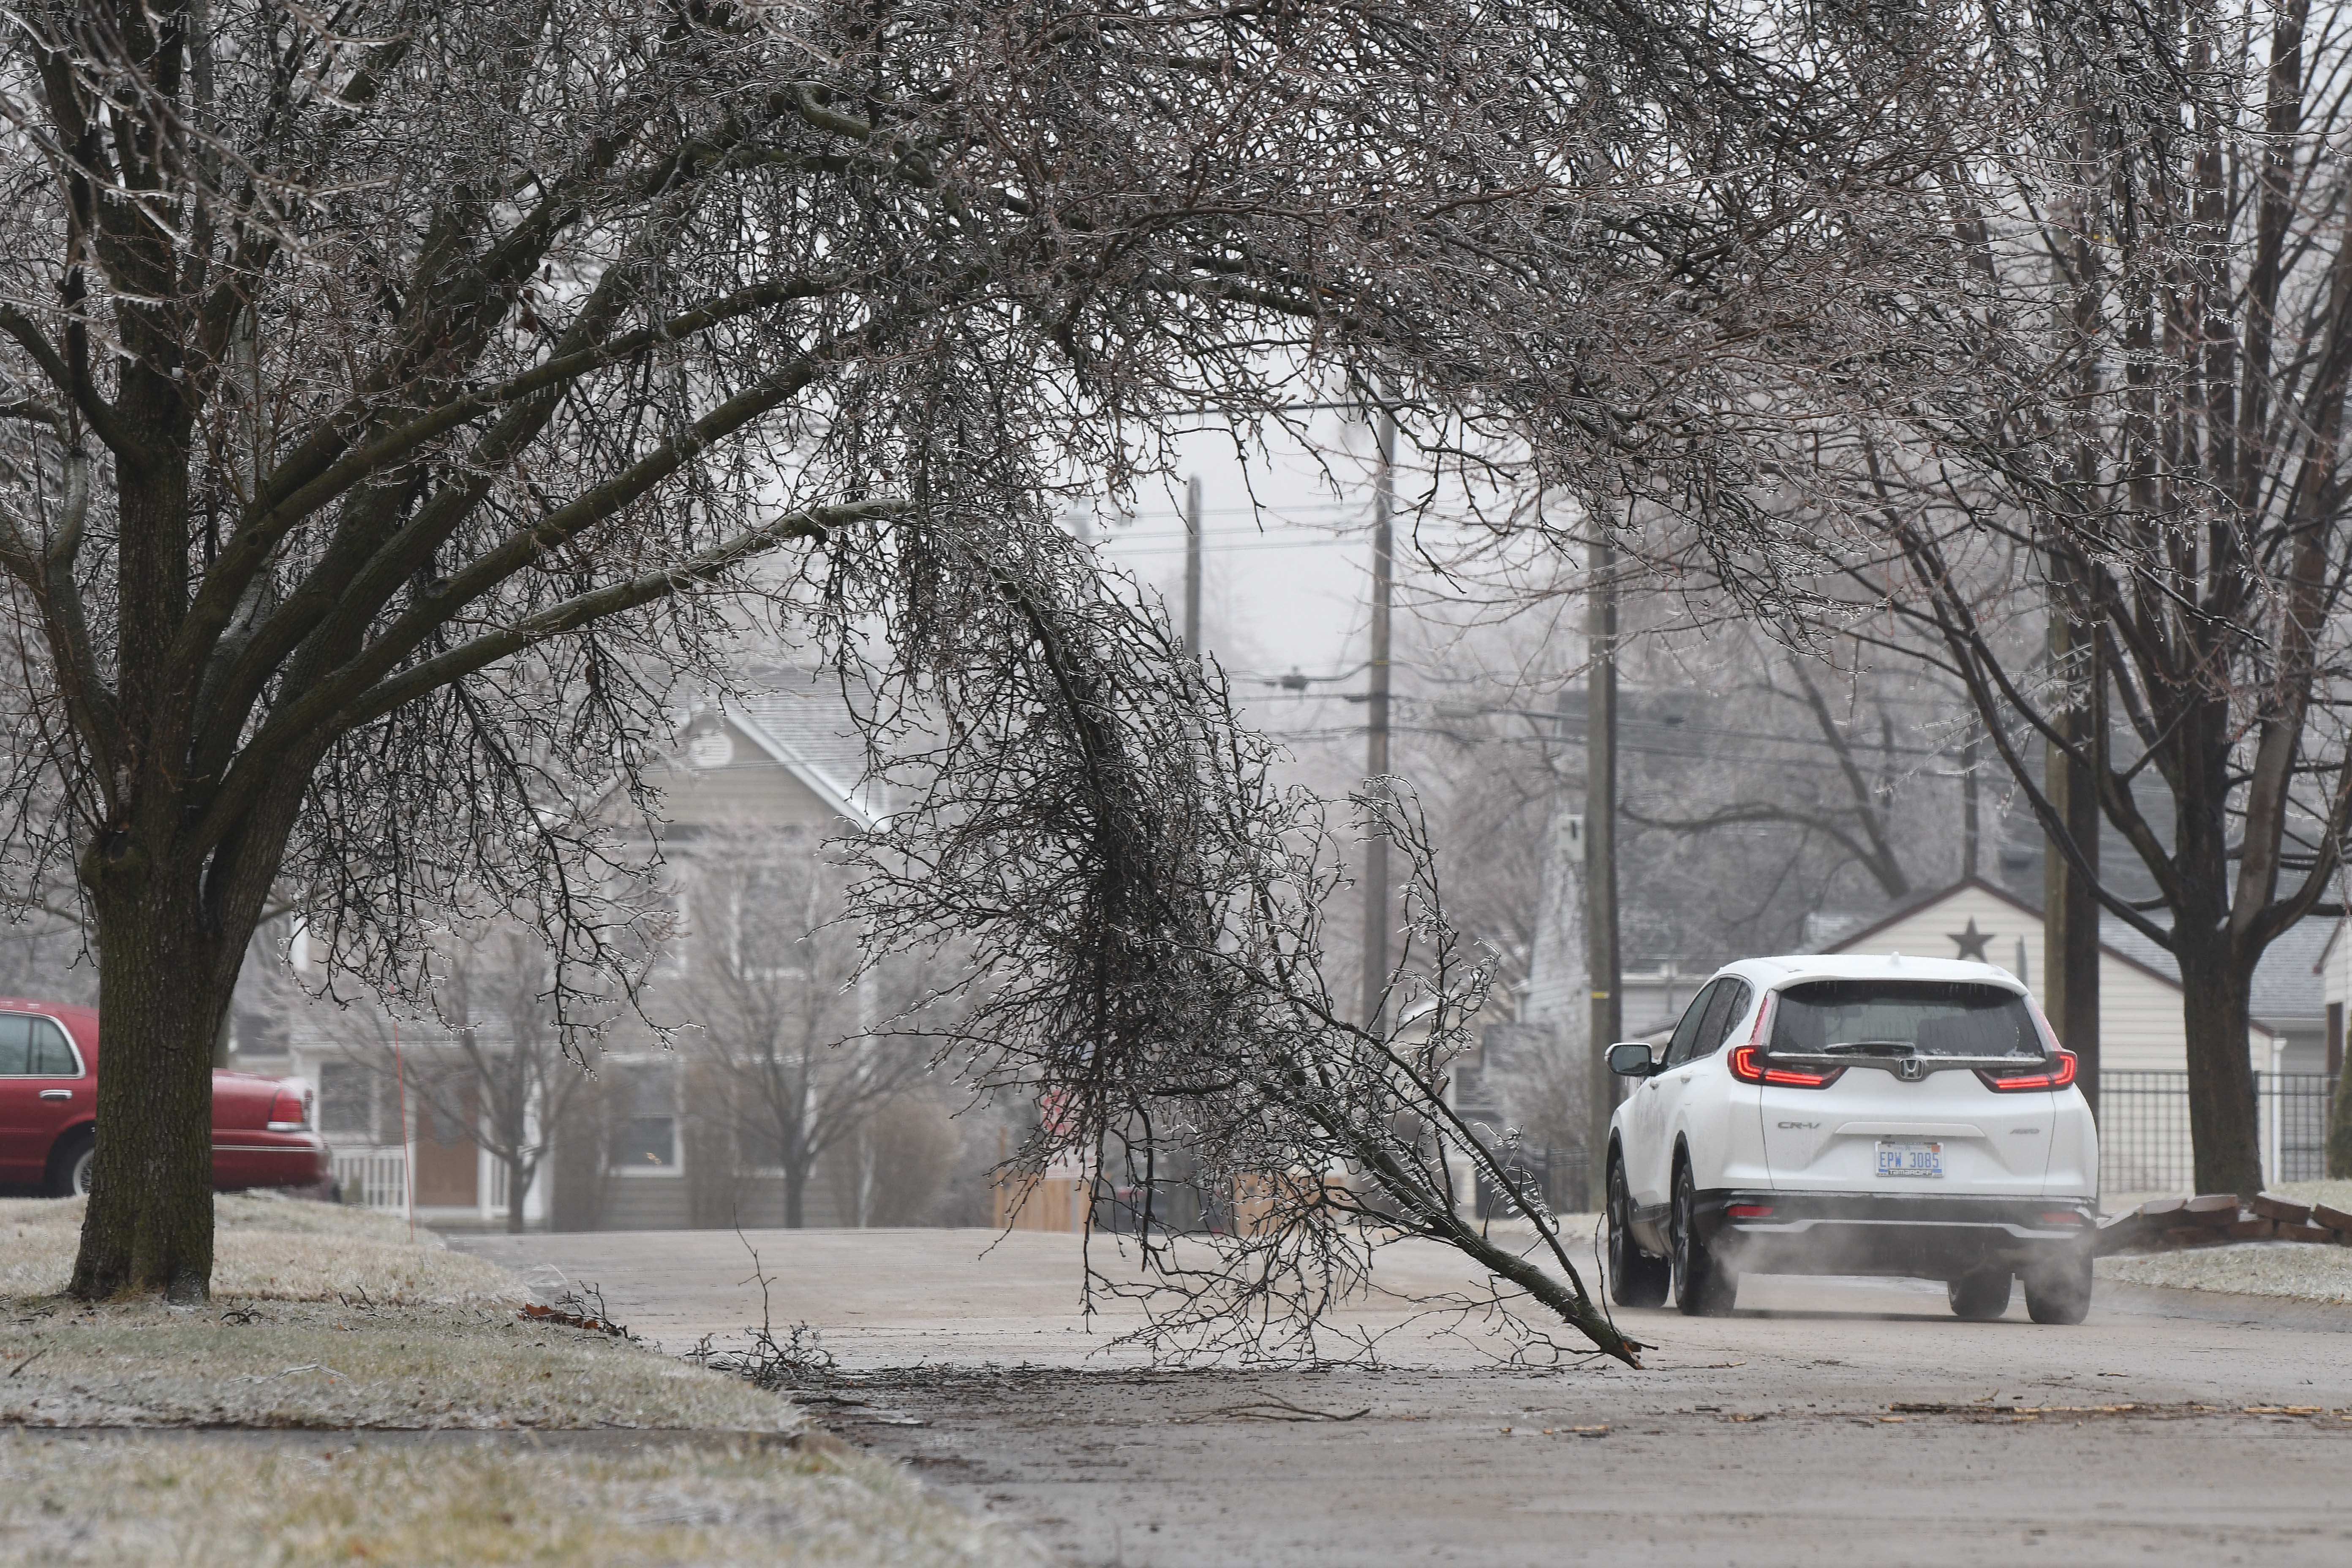 A car goes around a fallen branch on Henley due to an over night ice storm in Berkley, Michigan on February 23, 2023.